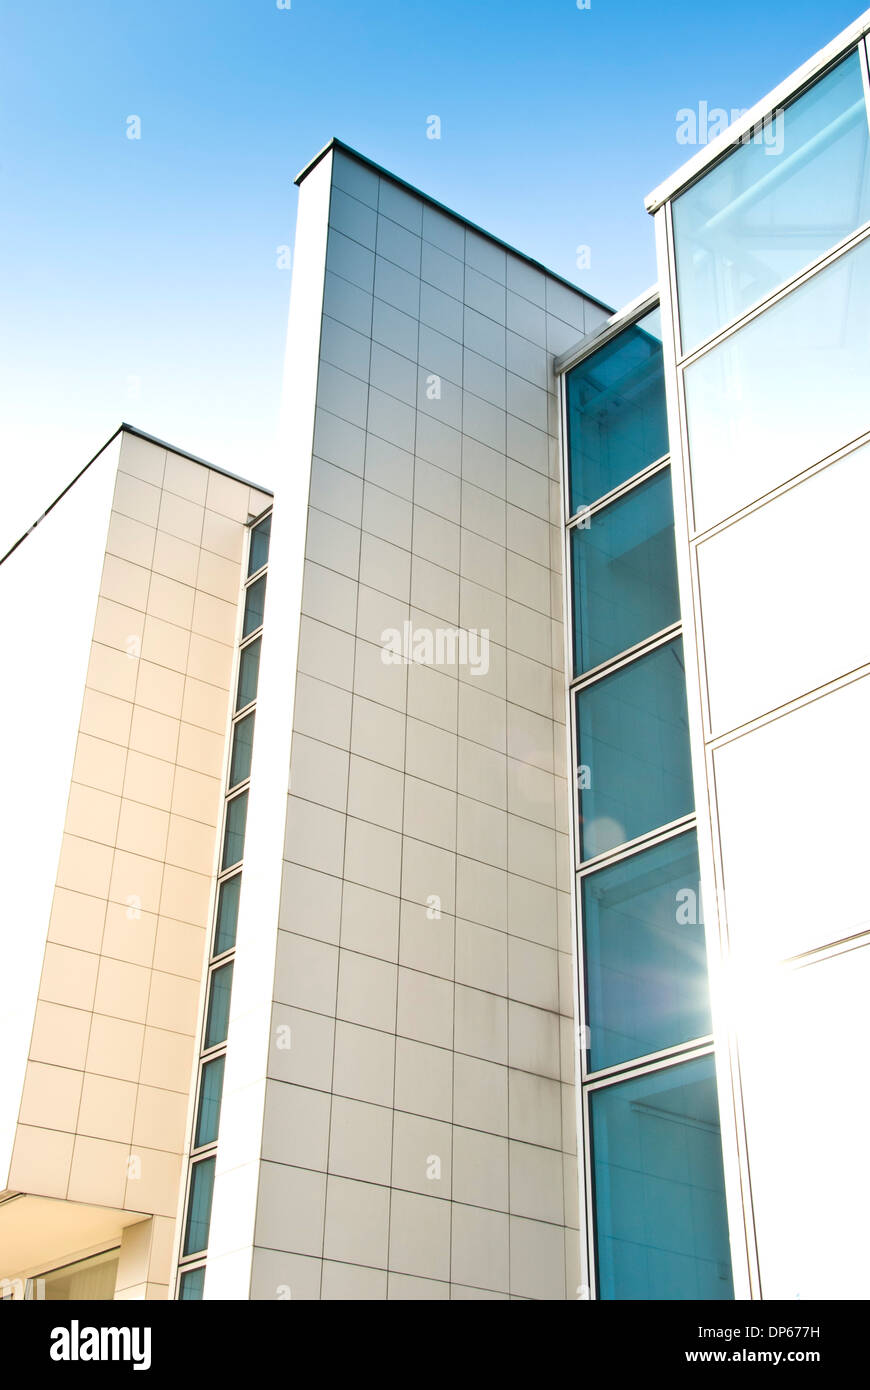 abstract modern building architecture Stock Photo